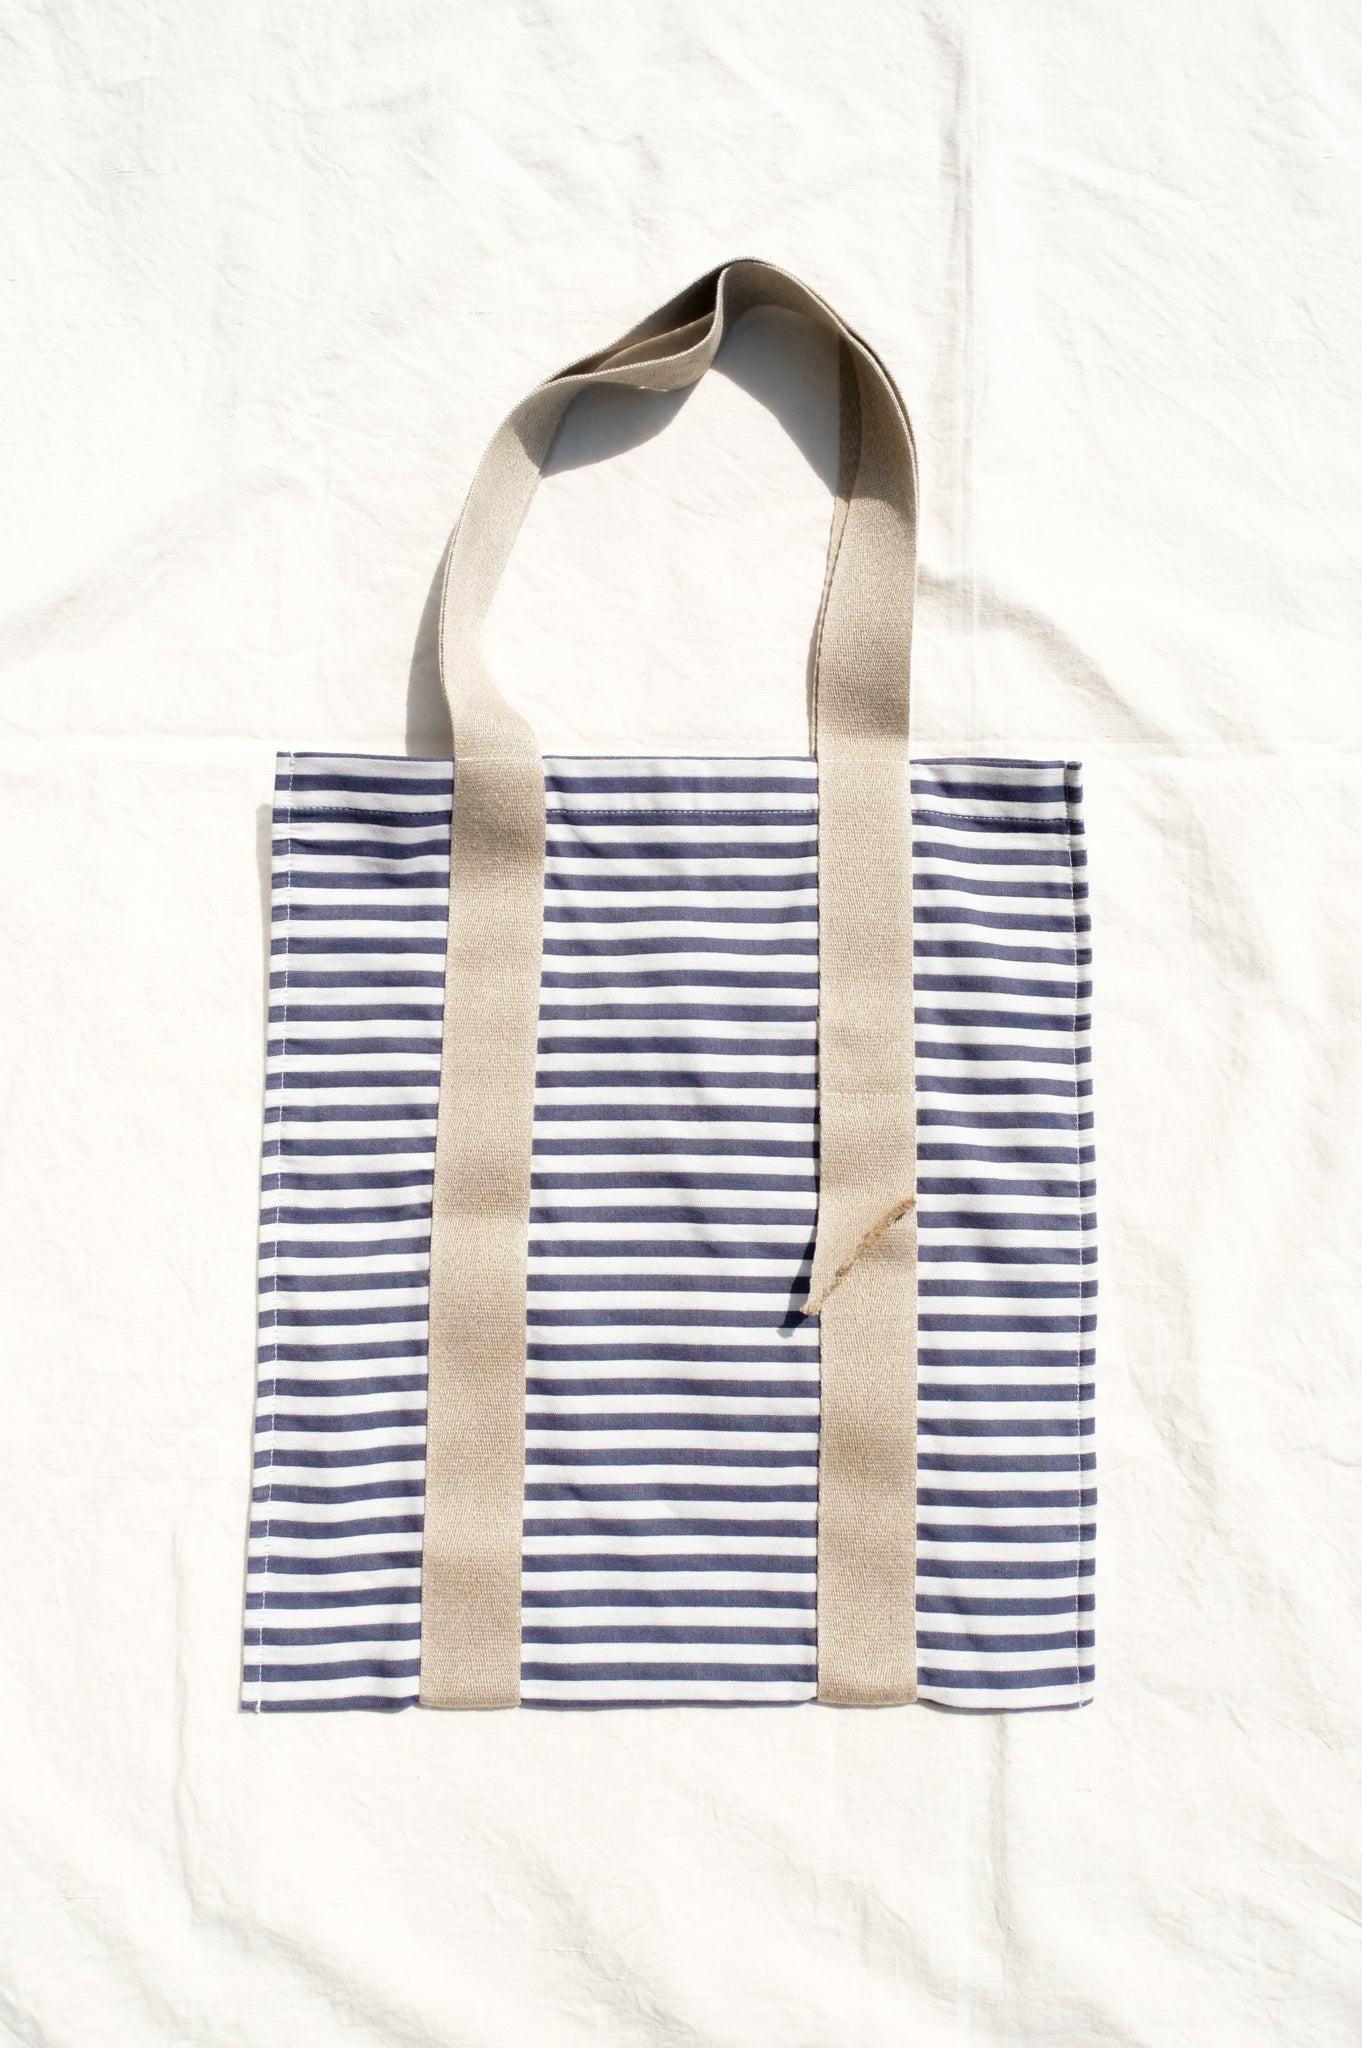 TENDER Co.  "TYPE 005 ONE STRAP TOTE BAG / COTTON TABLE CLOTH STRIPE"